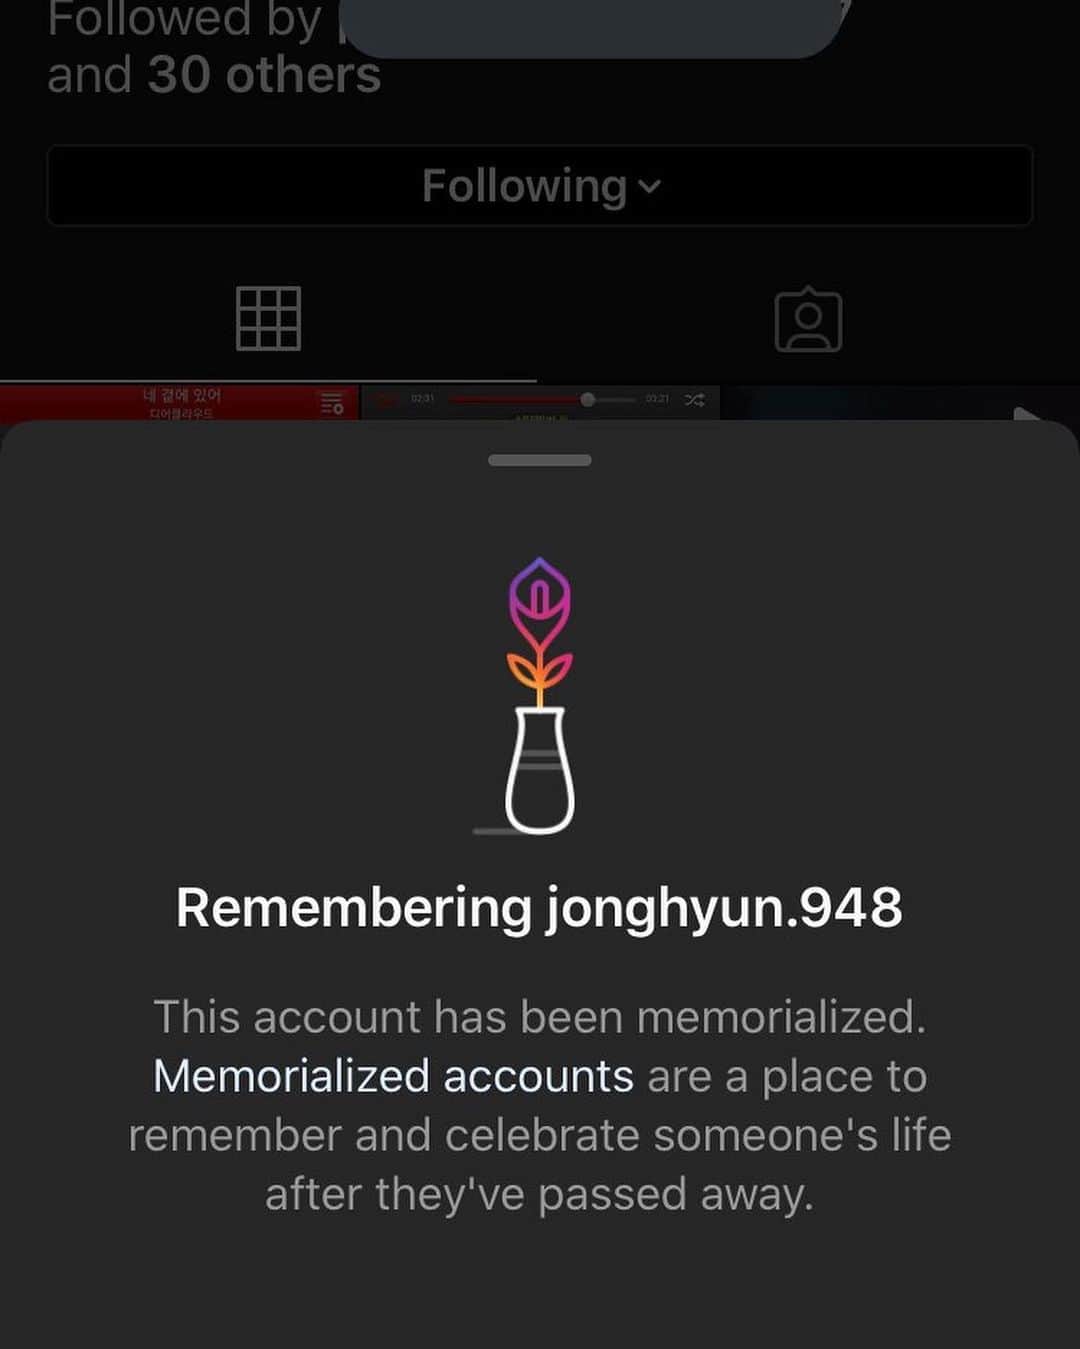 SHINeeのインスタグラム：「Instagram has a new feature where they will not take down the account of someone who has passed away. Instead they’ll keep it in remembrance of him. We miss you everyday Jonghyun ❤️」